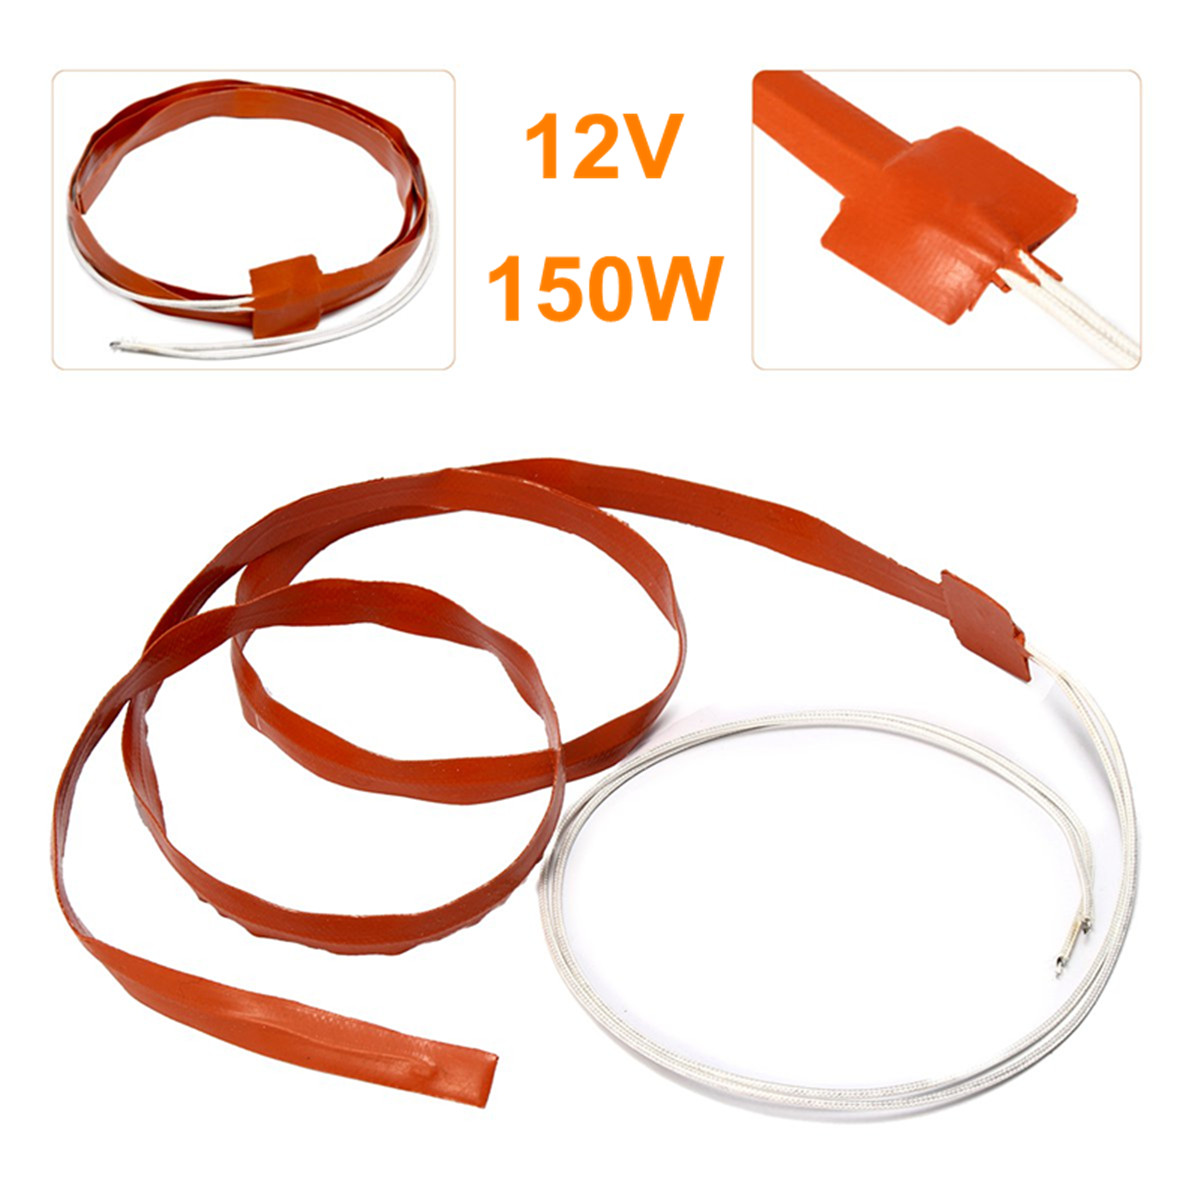 WVO-Intake-Pipe-Injection-Line-Manifold-Heater-Silicone-Heat-Strip-12m-150W-12V-1635480